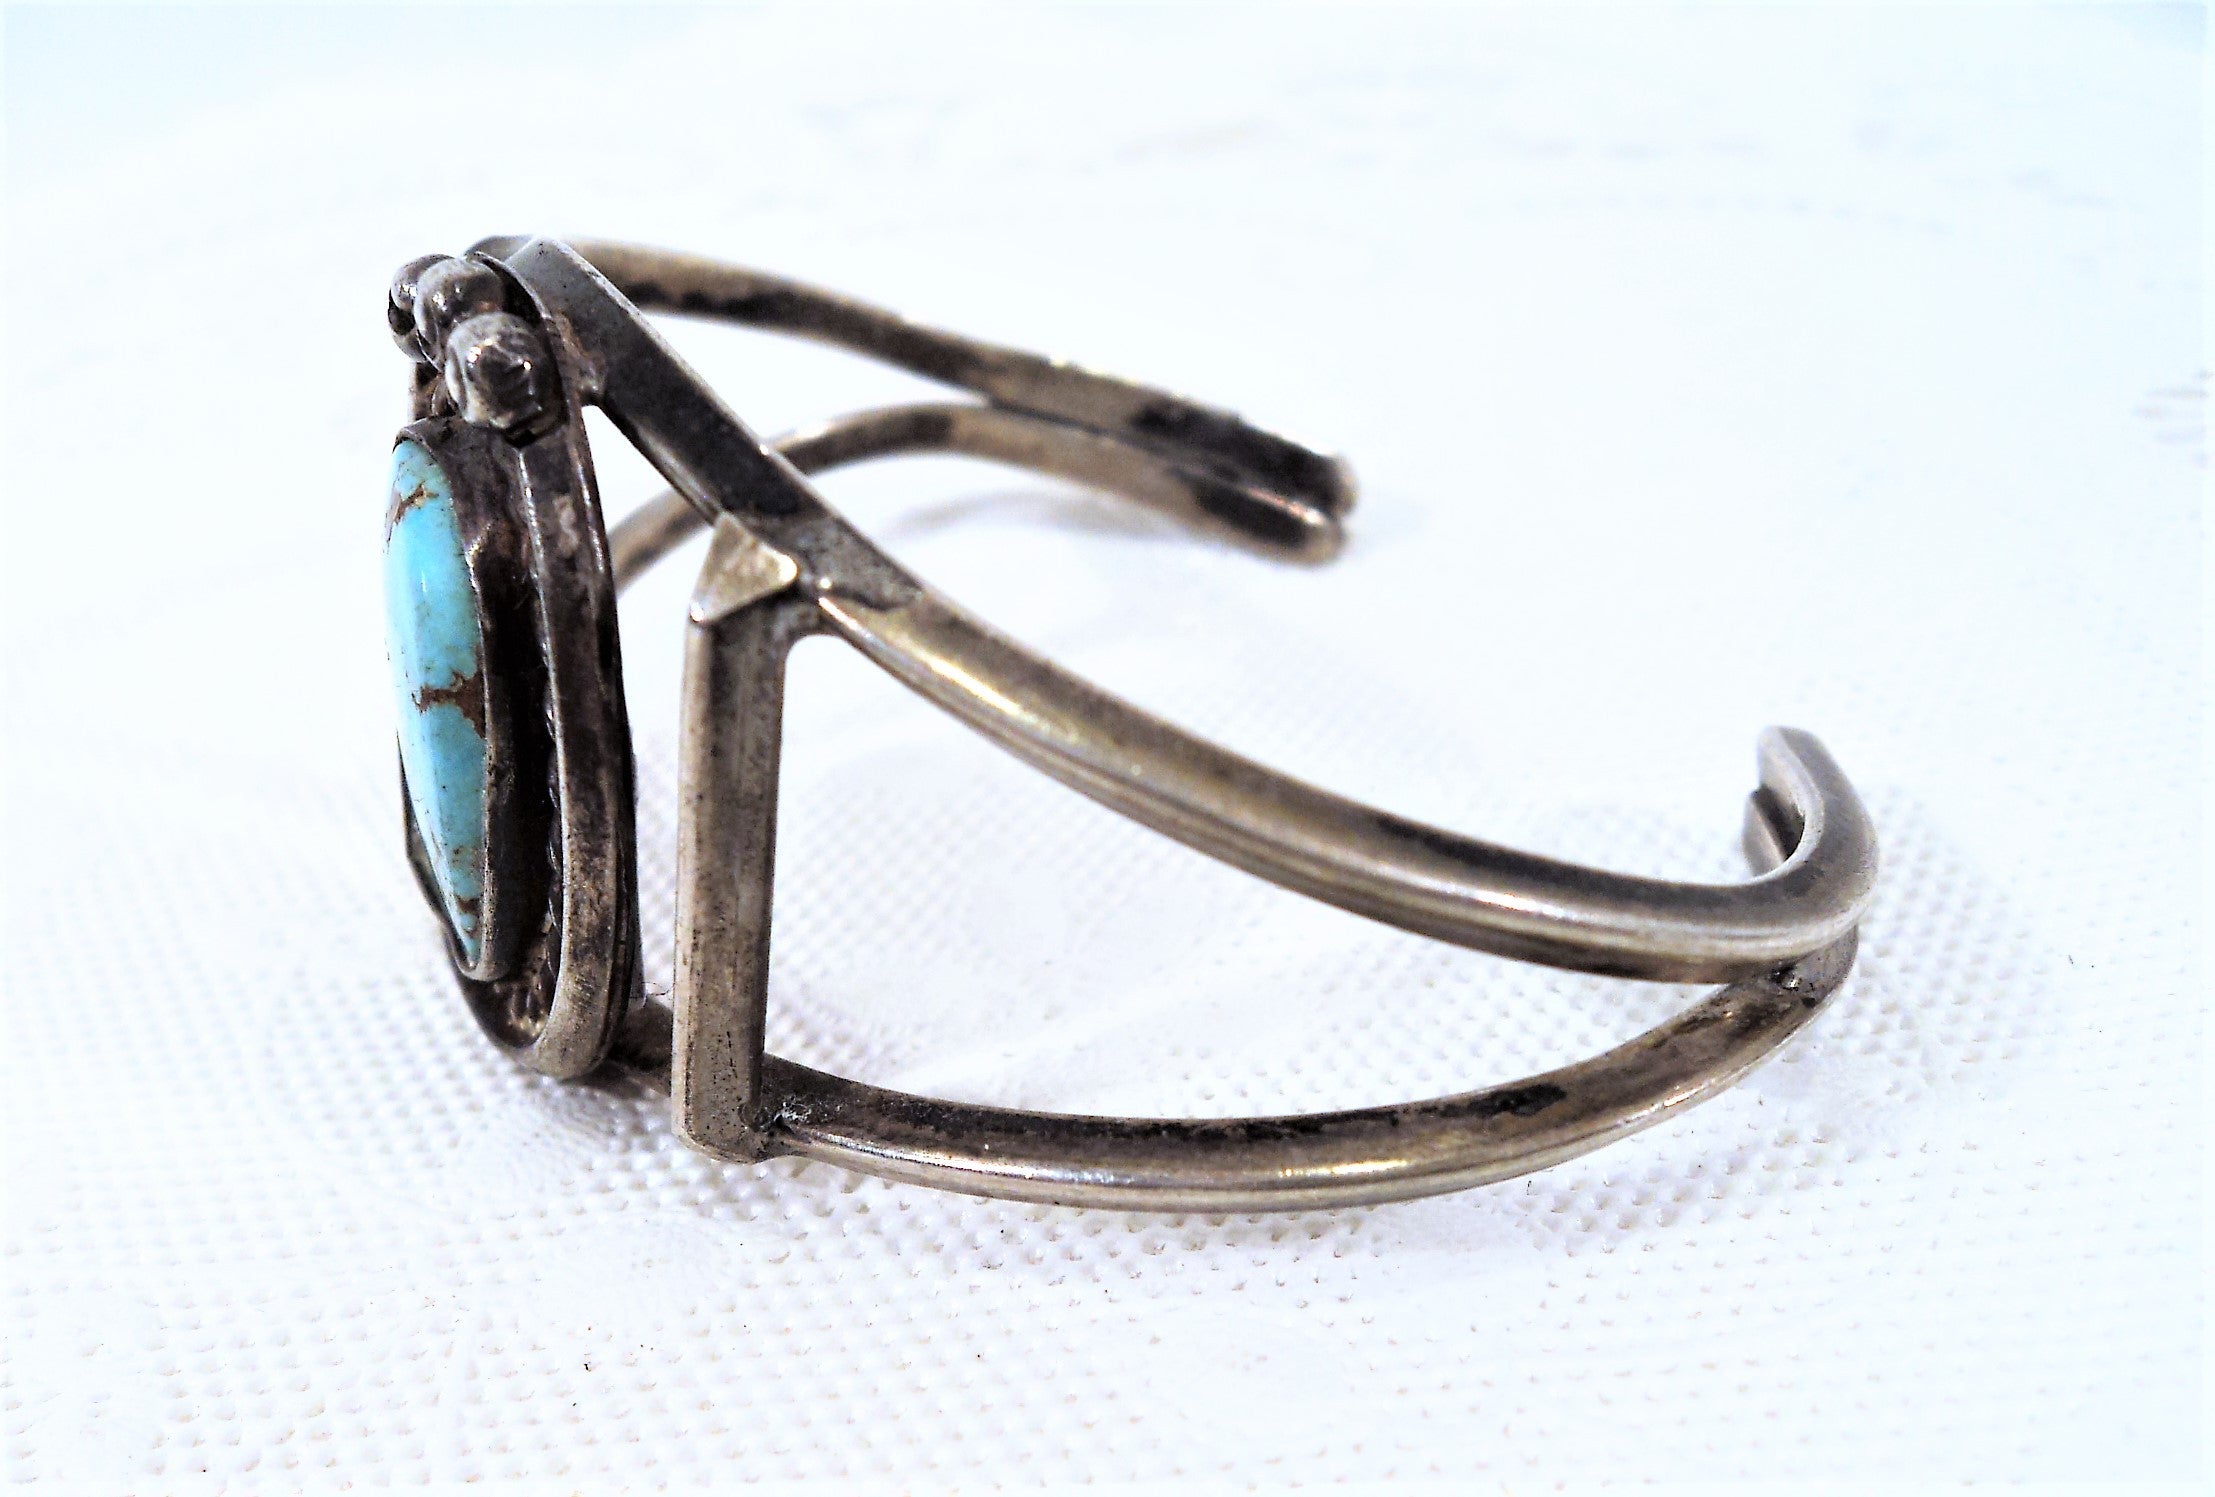 Vintage Native American Turquoise and Silver Cuff Bracelet